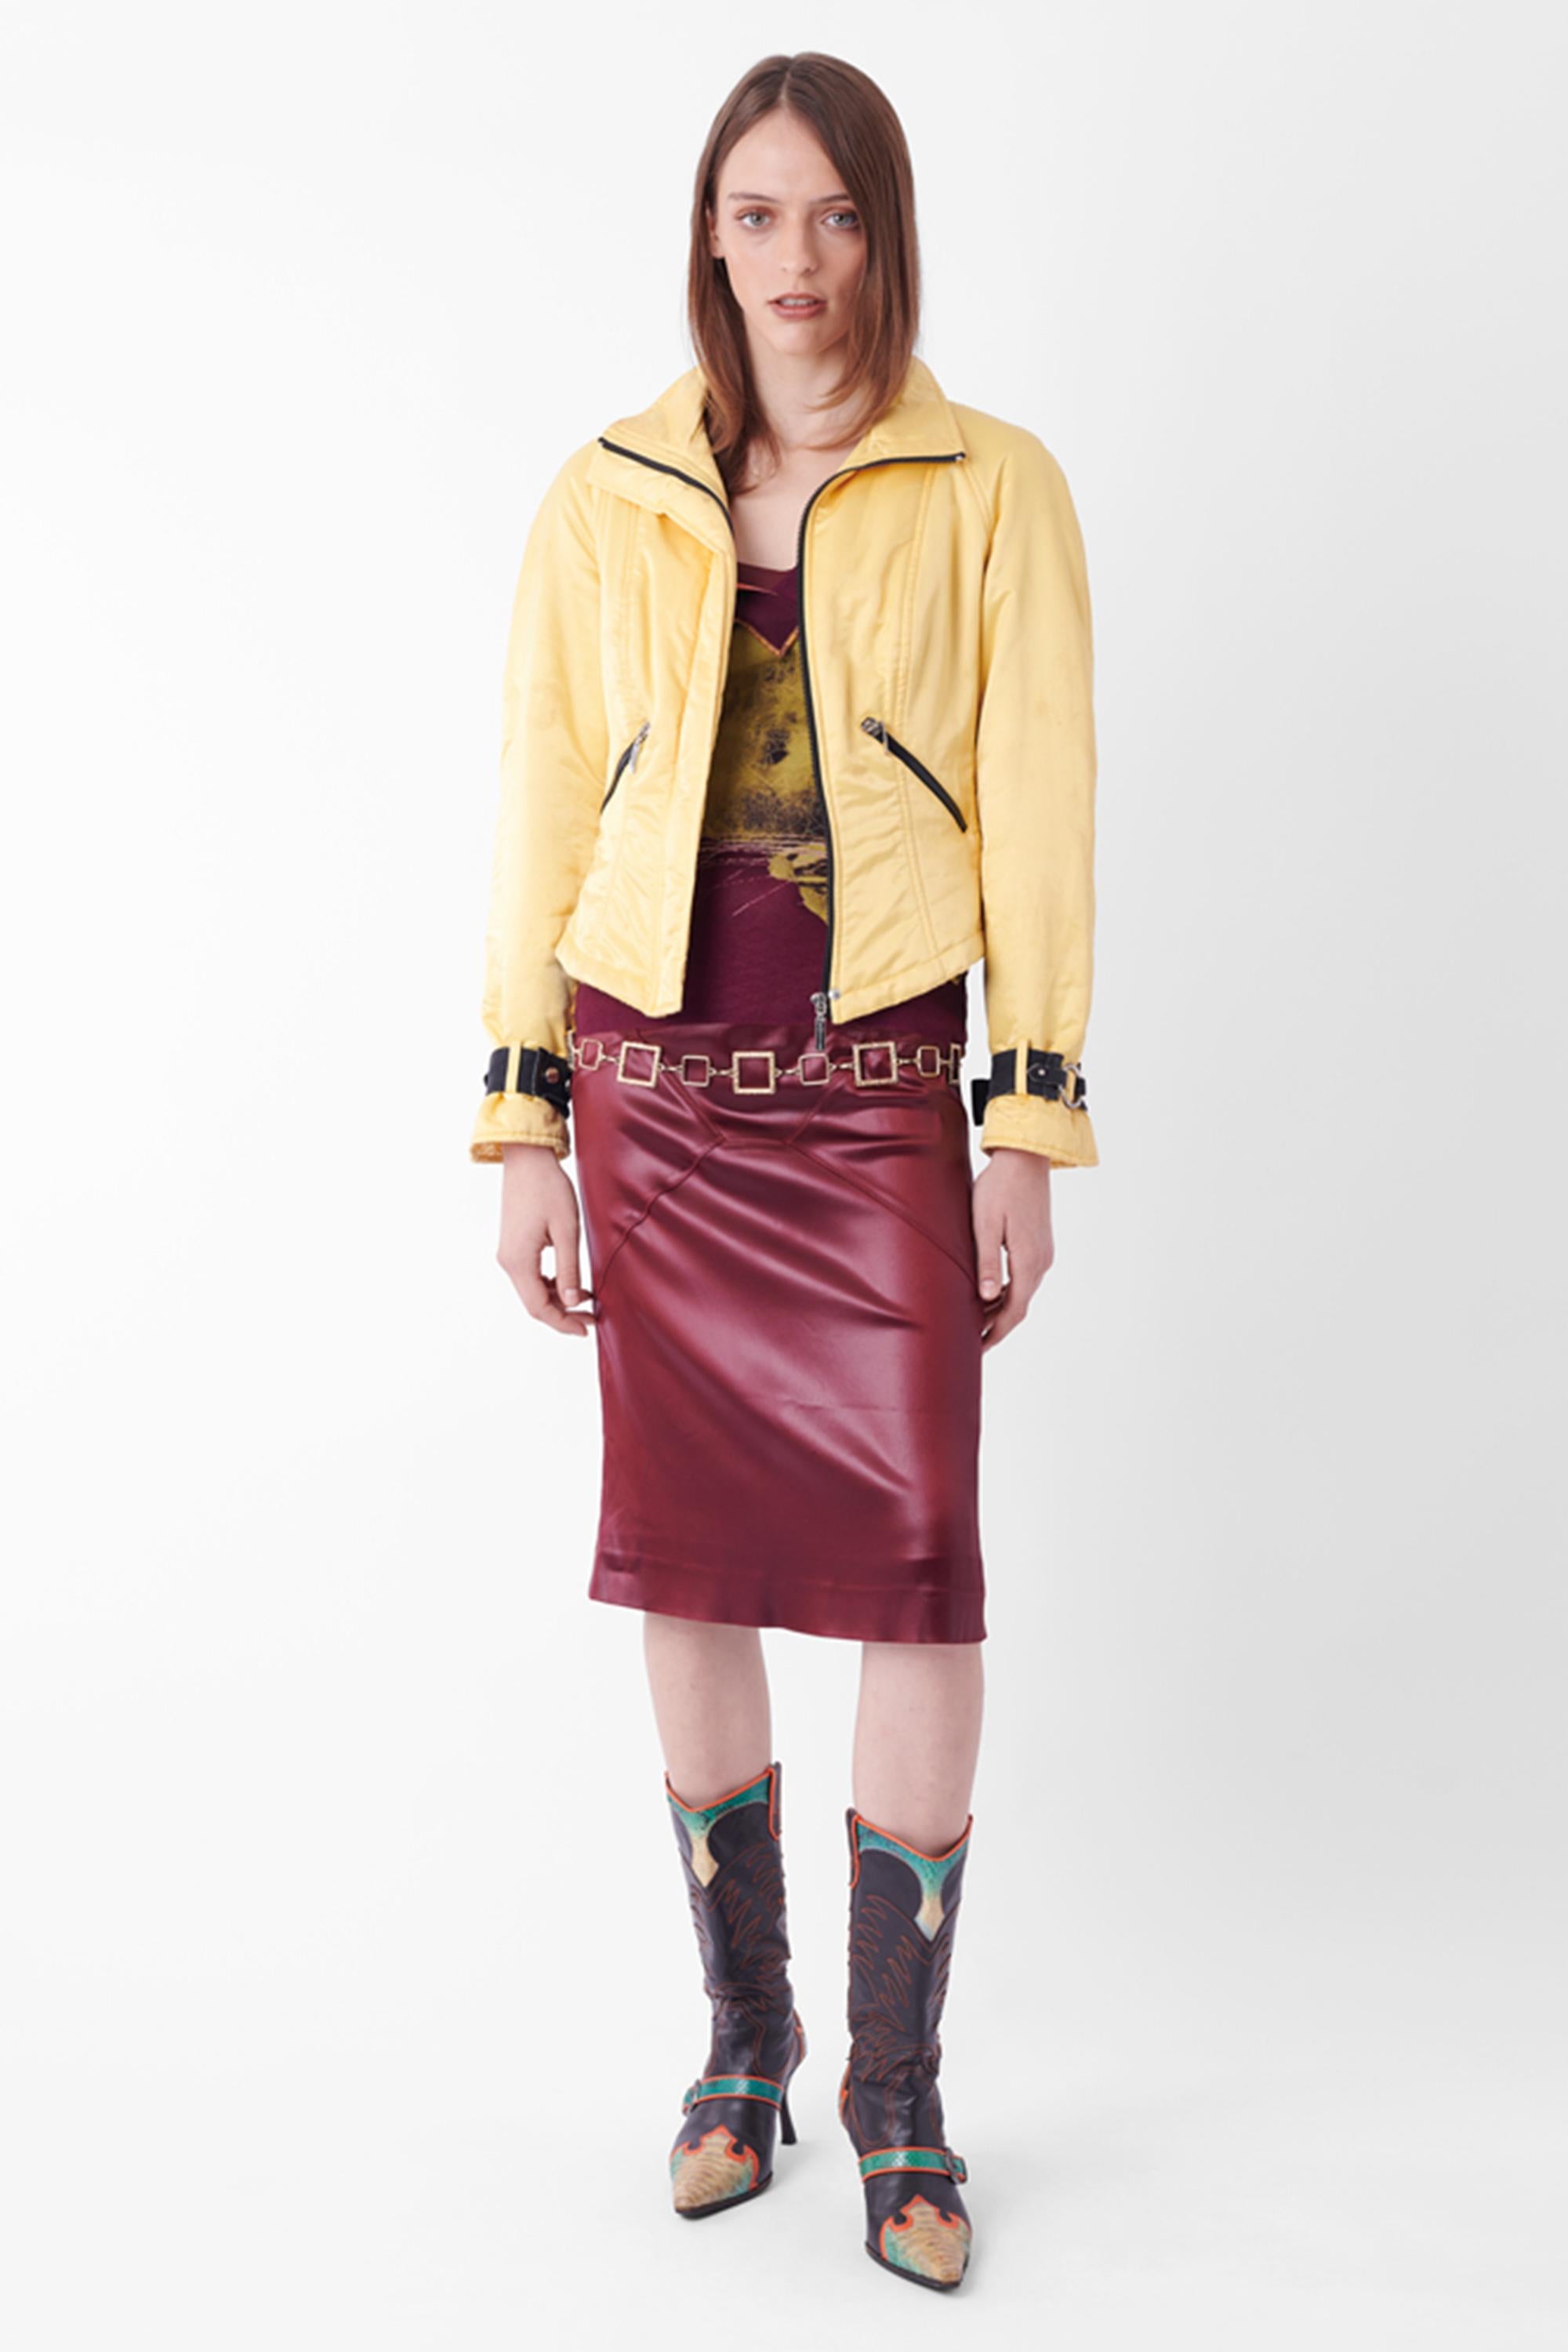 Women's Roccobarocco S/S 2000 Padded Yellow Jacket For Sale